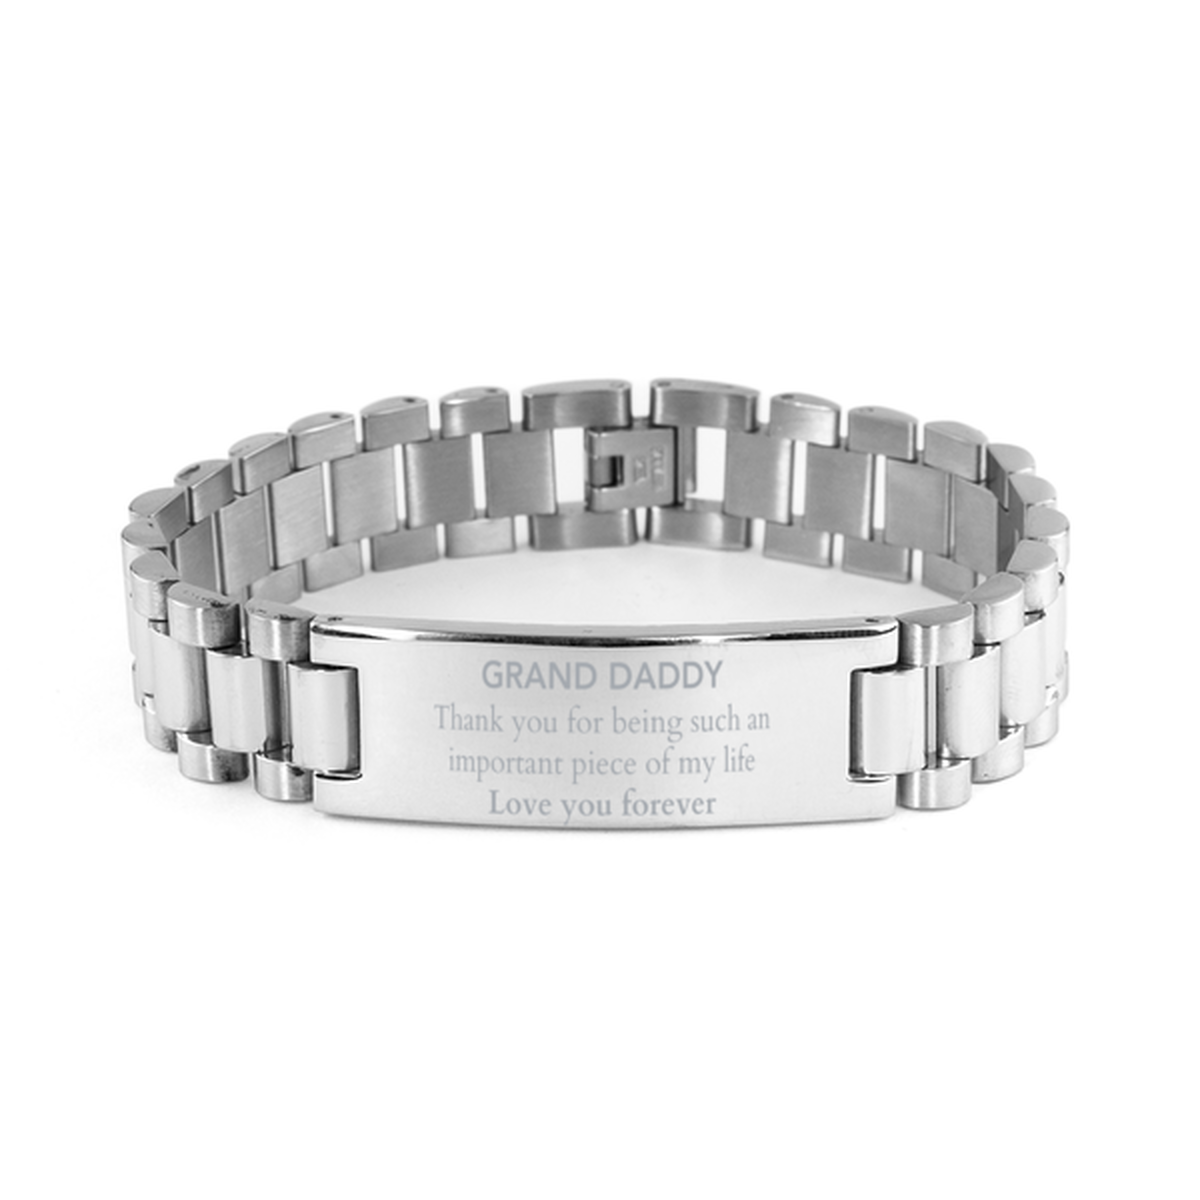 Appropriate Grand Daddy Ladder Stainless Steel Bracelet Epic Birthday Gifts for Grand Daddy Thank you for being such an important piece of my life Grand Daddy Christmas Mothers Fathers Day